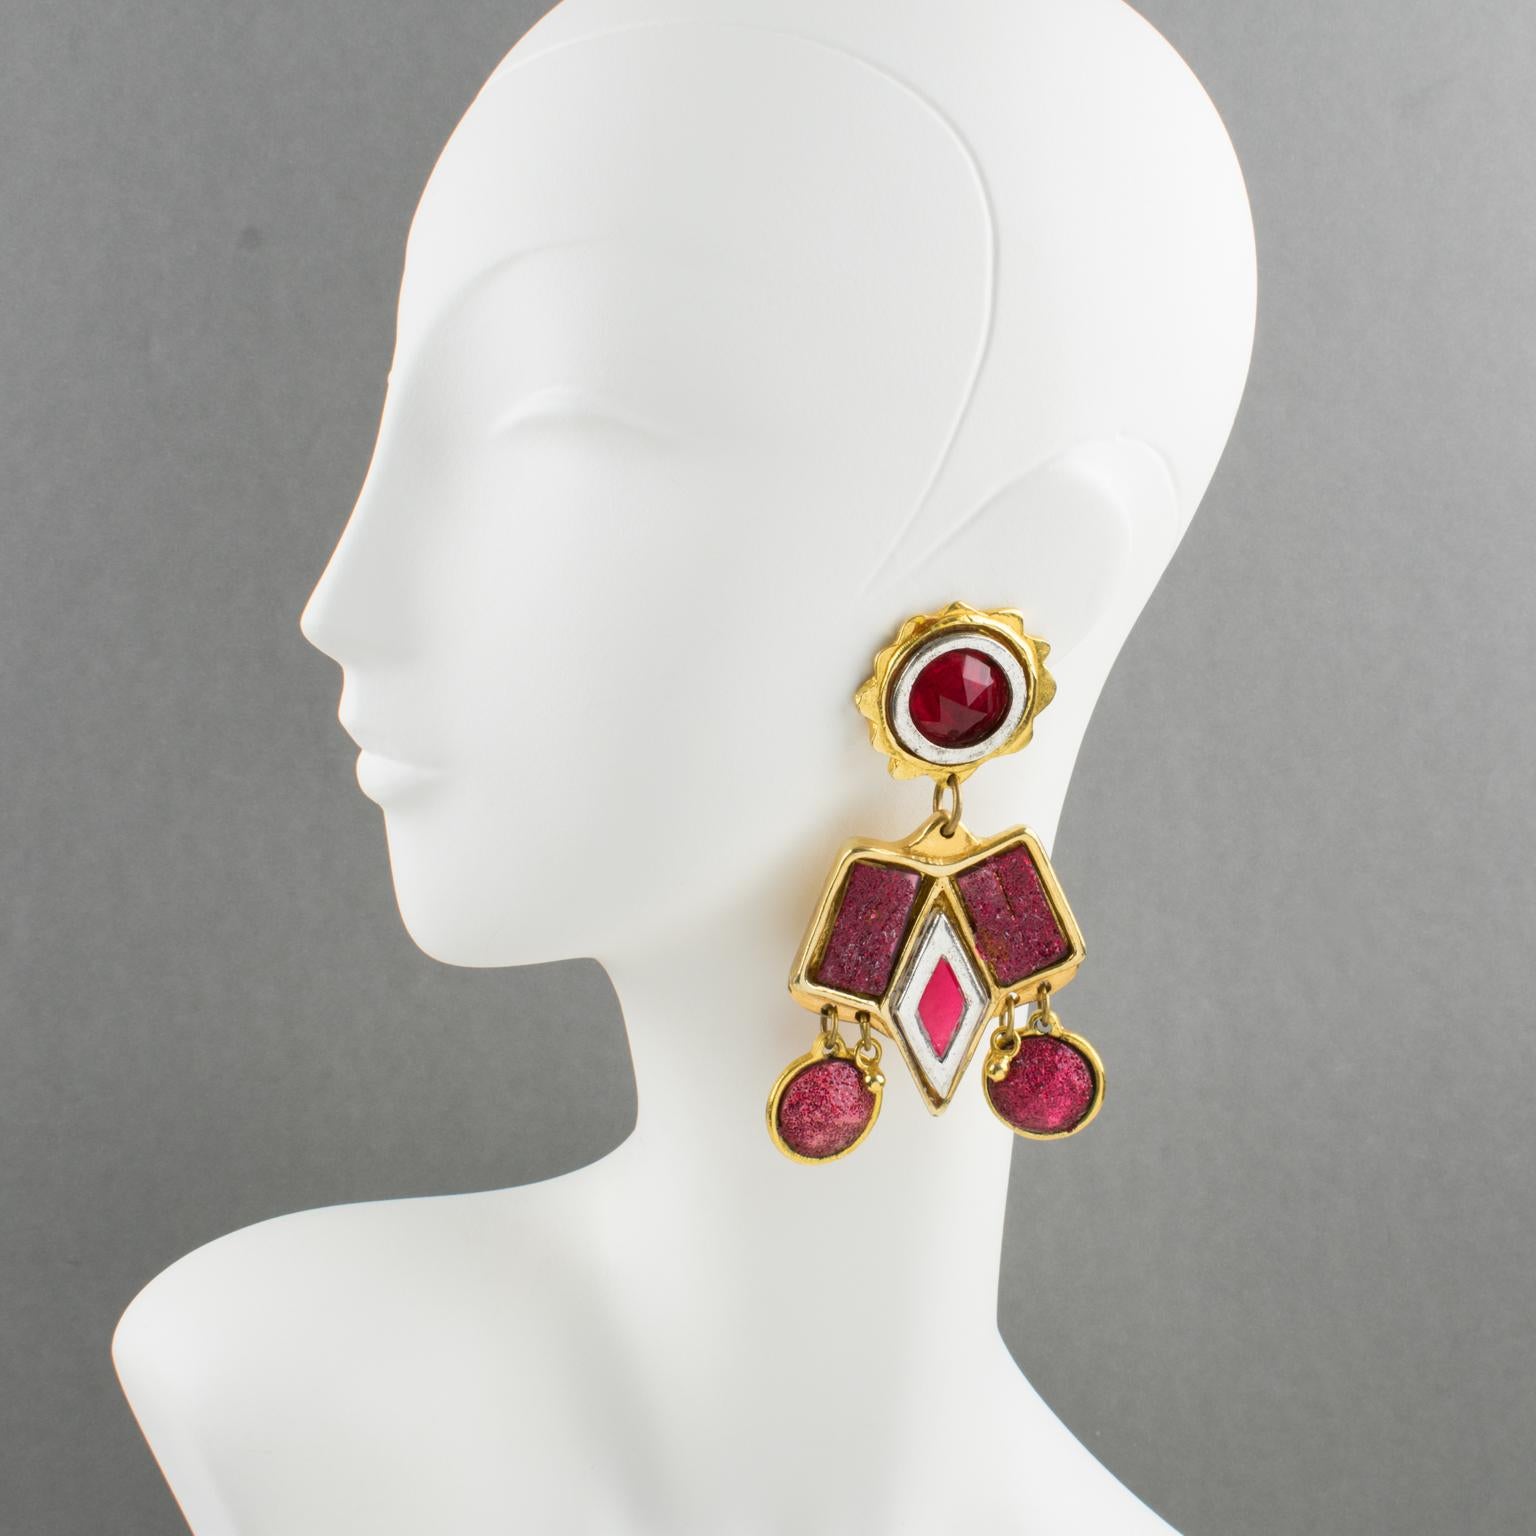 These fabulous Kalinger Paris oversized clip-on earrings feature a geometric dangling shape. The gilded-metal and silvered-metal-coated resin frame has dangling charms. All elements are ornate with ruby-red resin rhinestones and cabochons, with some